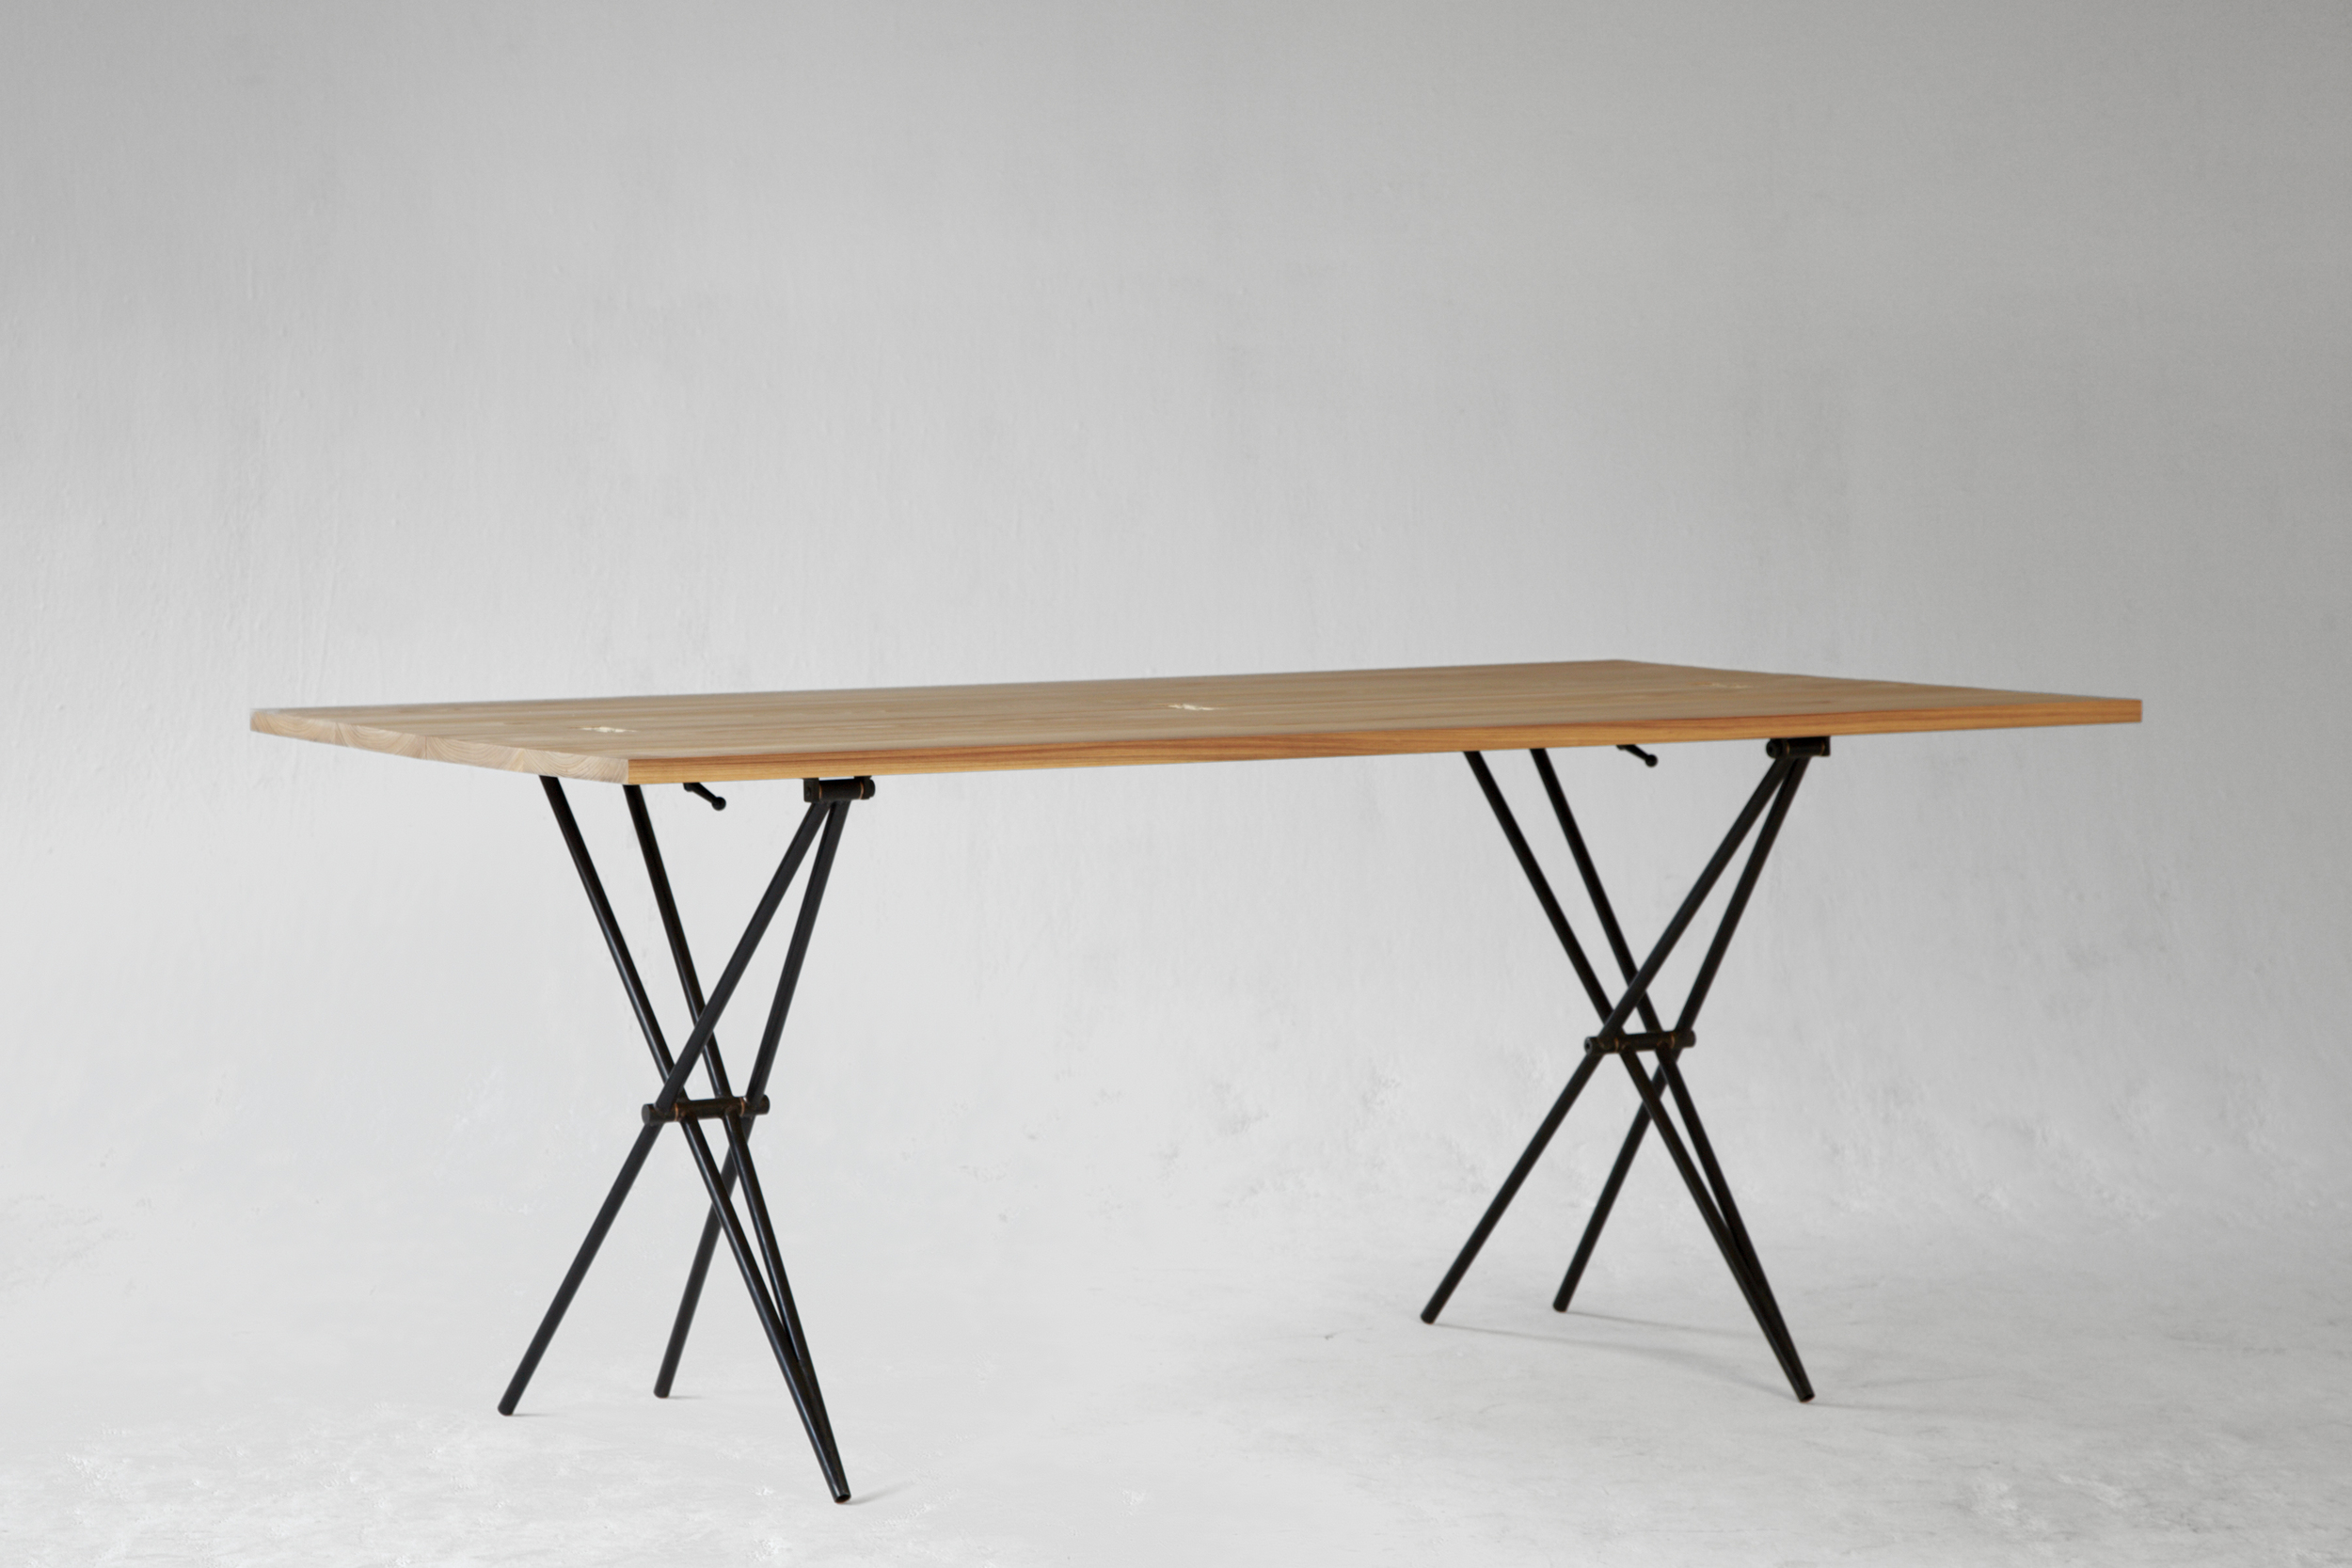  Configured as a 72" by 40" dining table, the Larmer table can seat 6 comfortably, 8 intimately. 